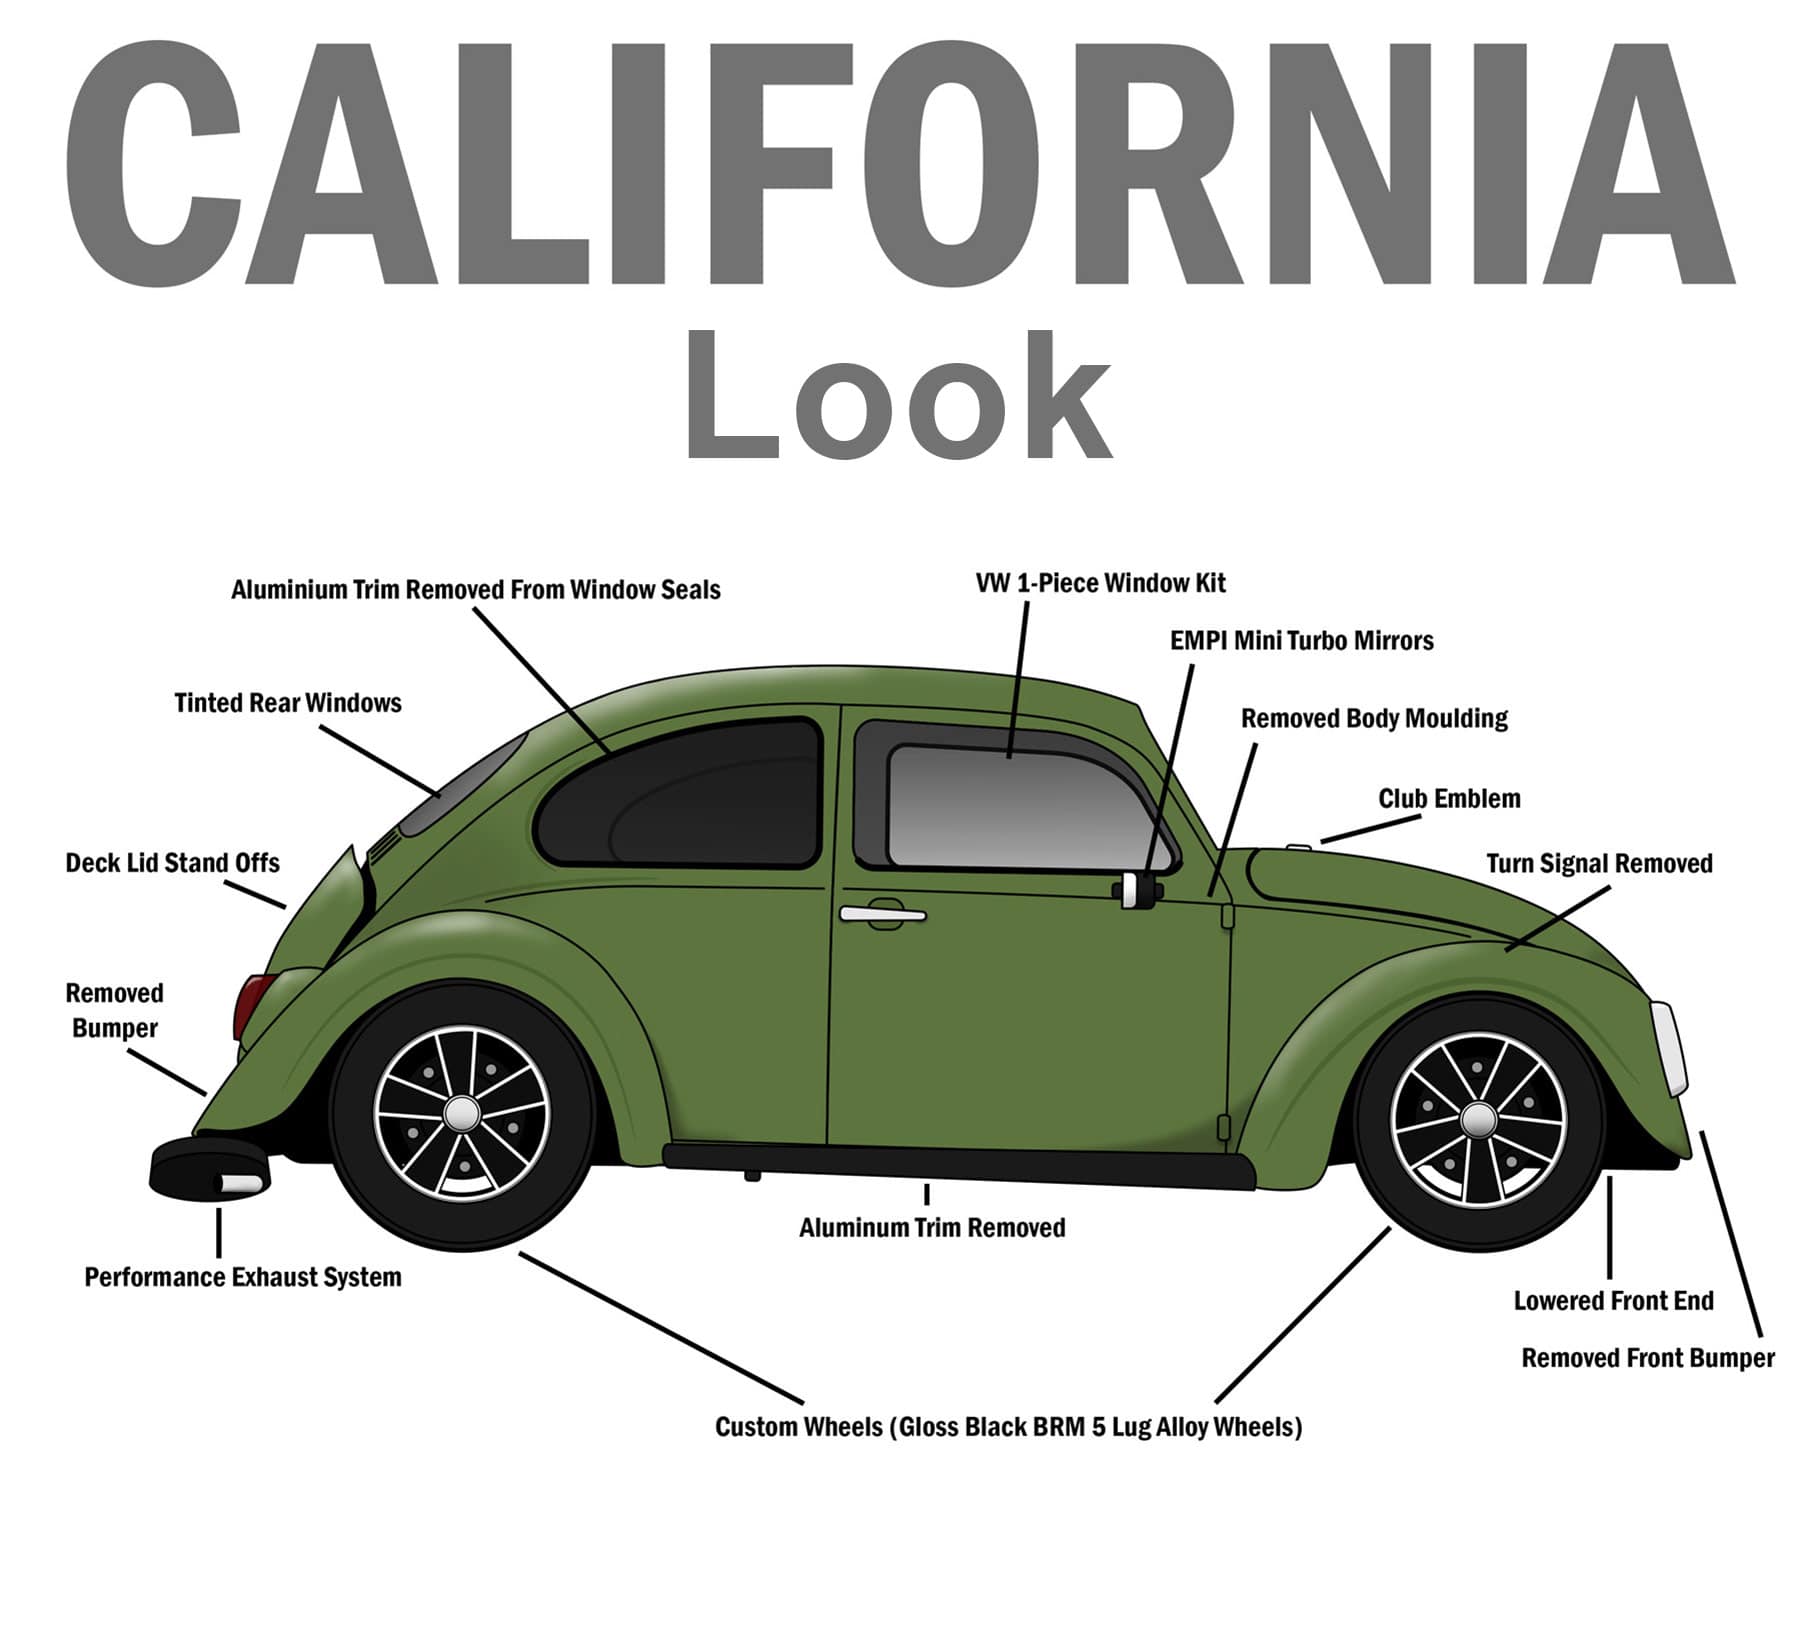 Air Cooled VW Logo - VW Parts. JBugs.com: Cal Look Vs American Style. Whats The Difference?